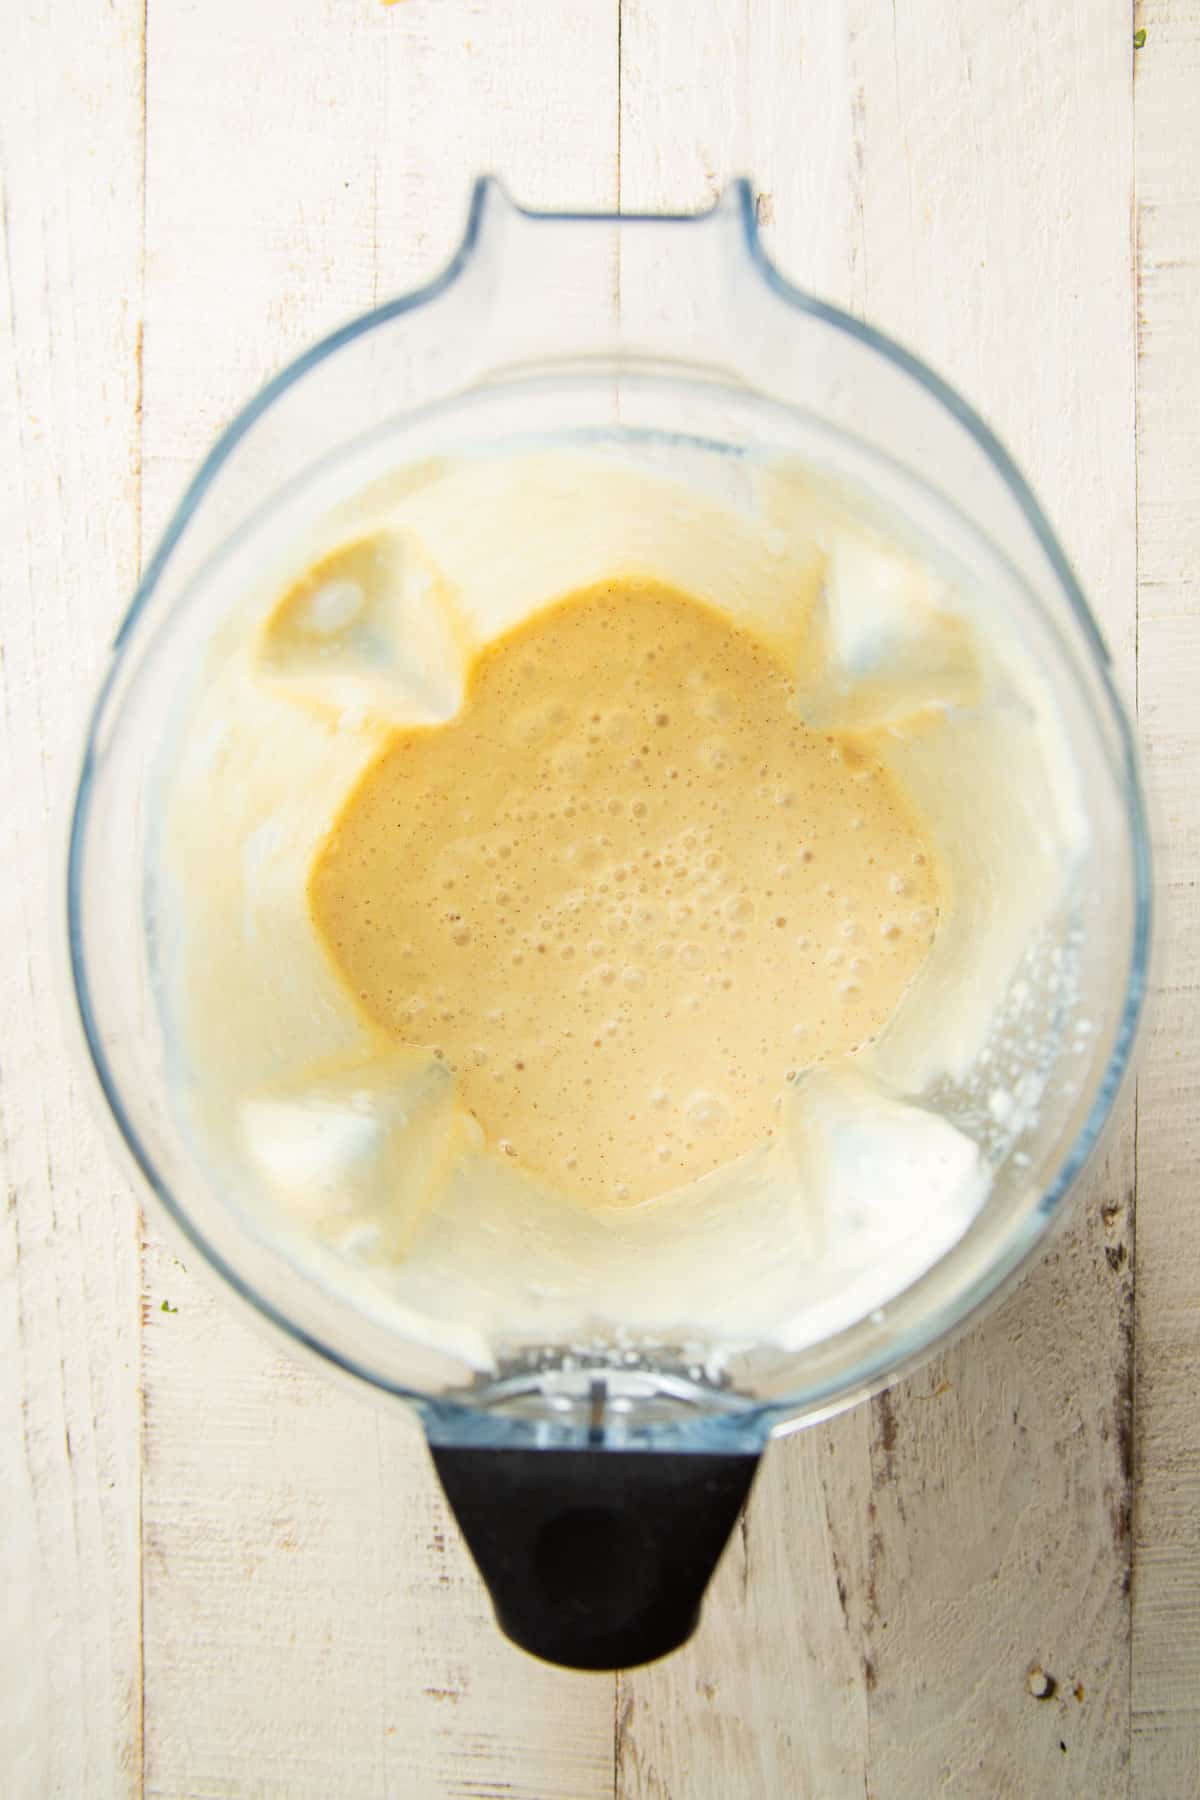 Uncooked banana pudding mixture in a blender.